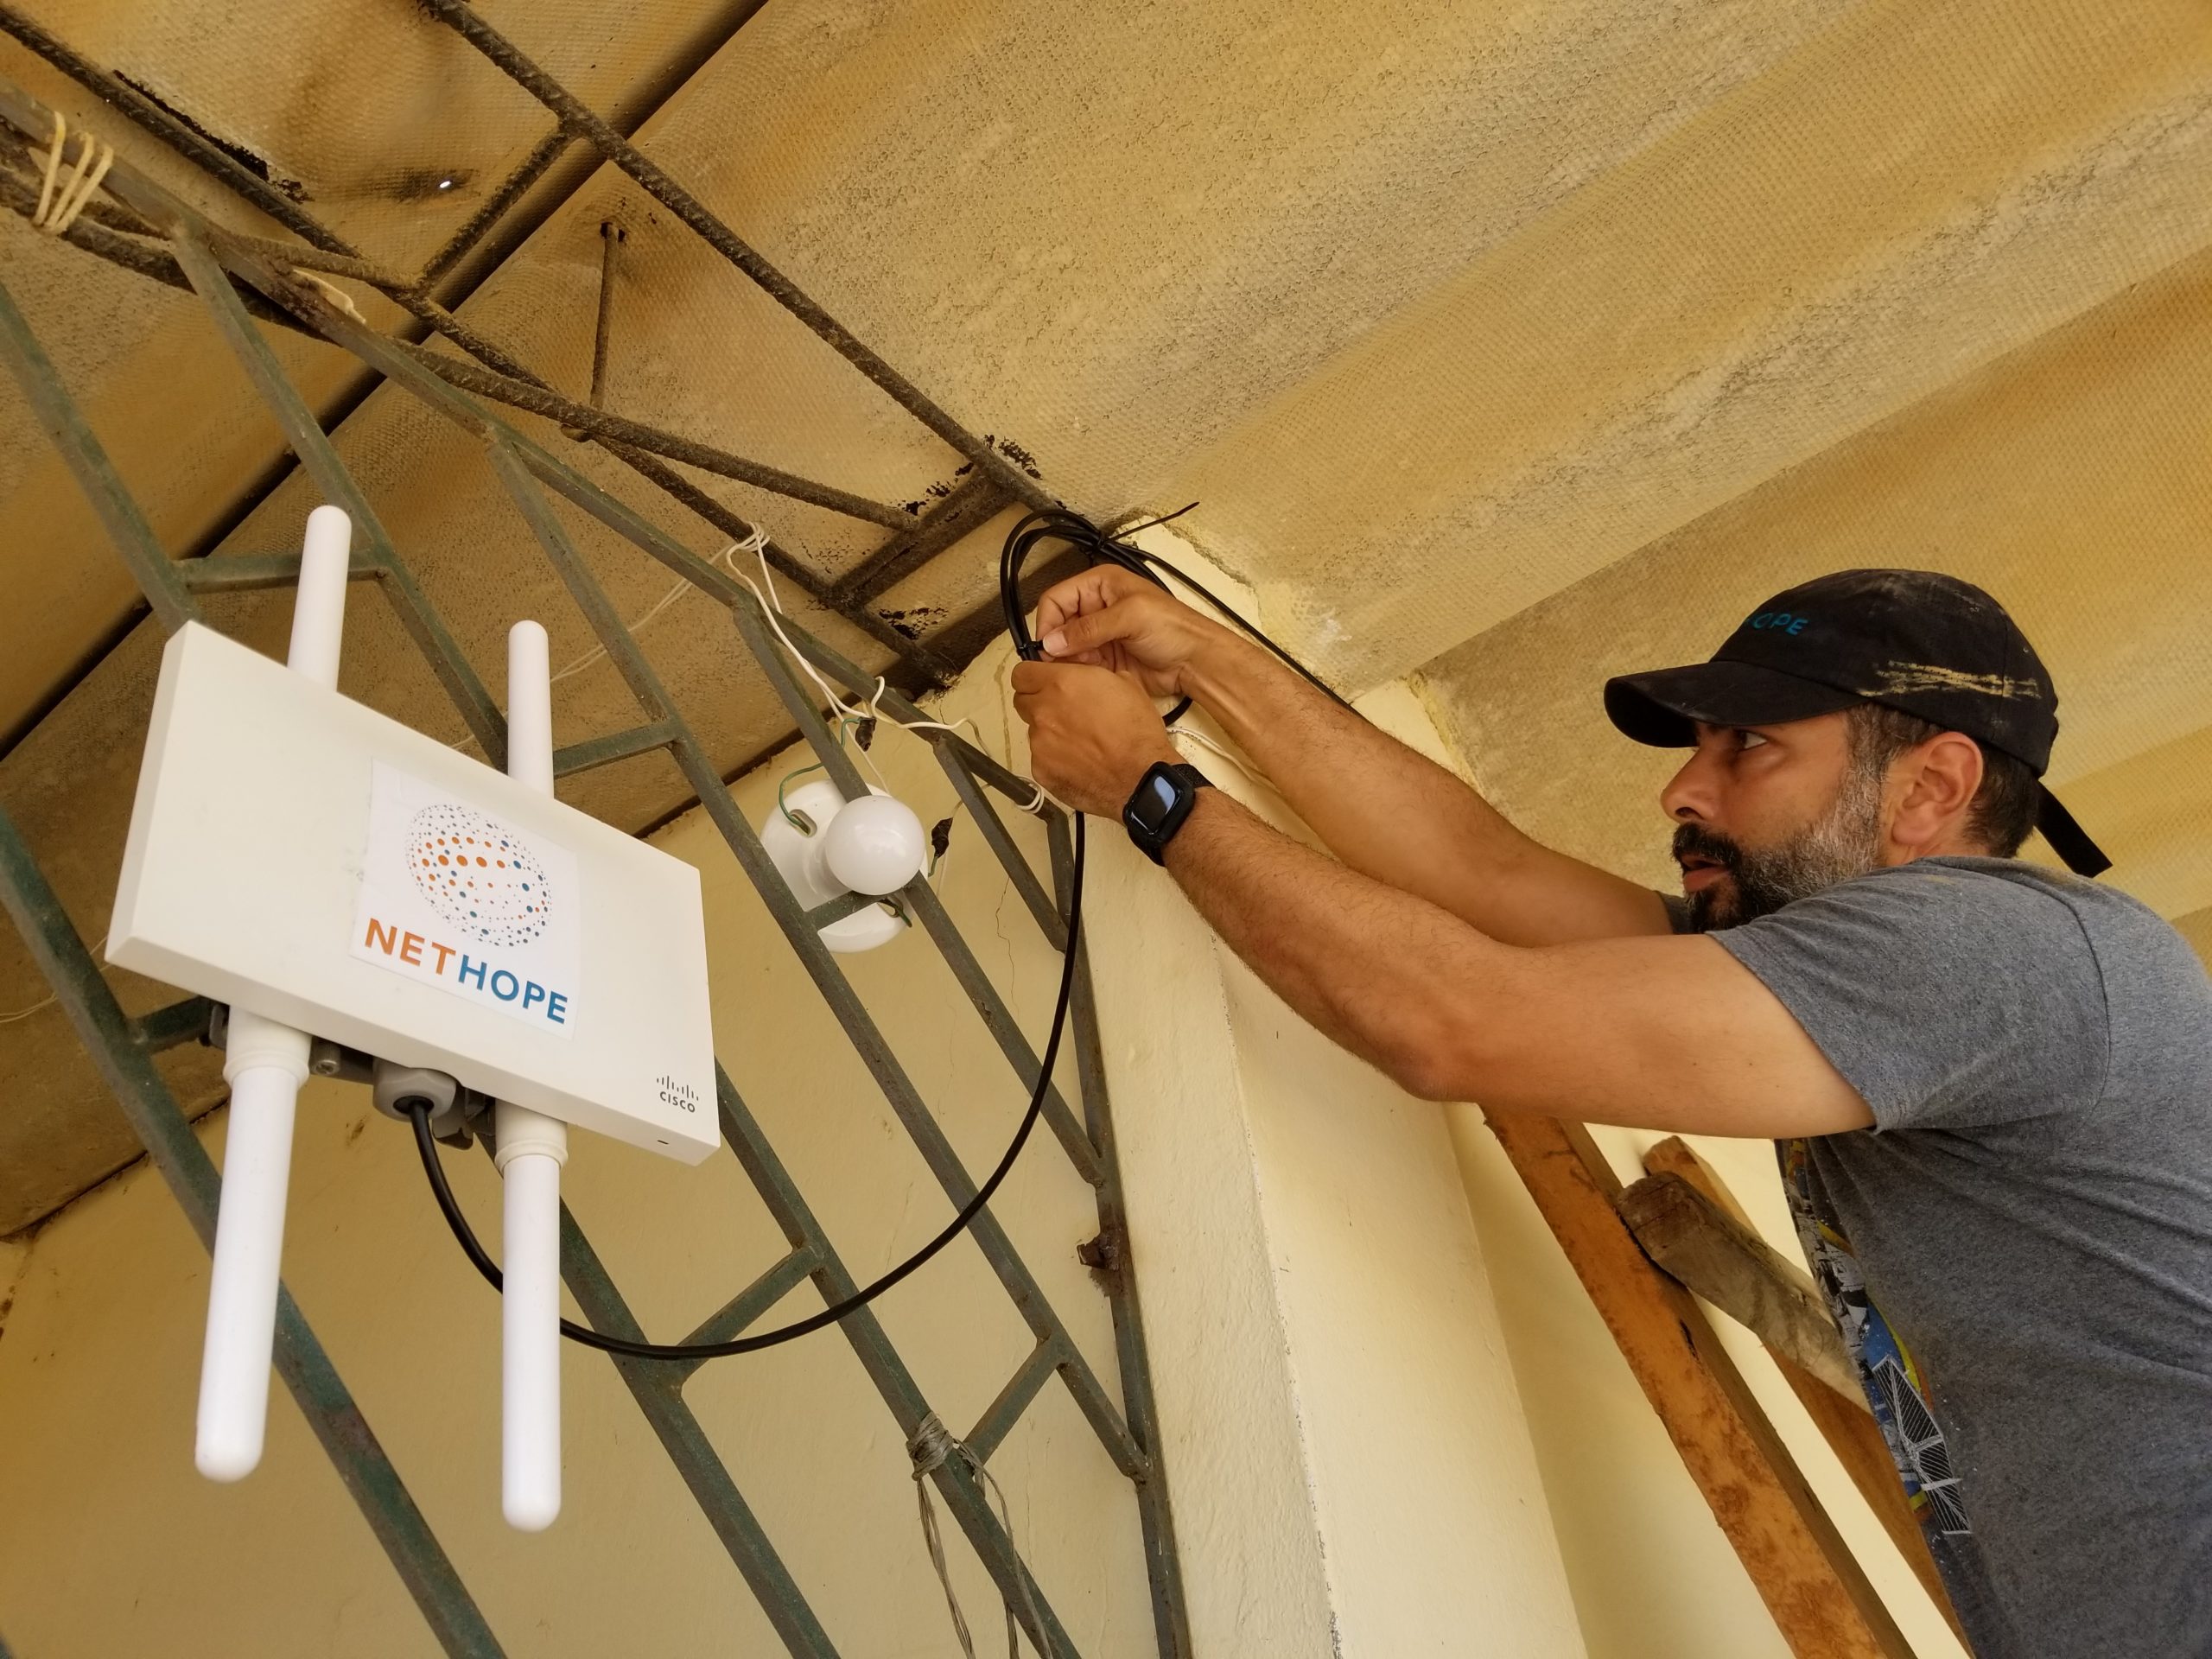 Man installing wireless connection hardware on the outside of a building.